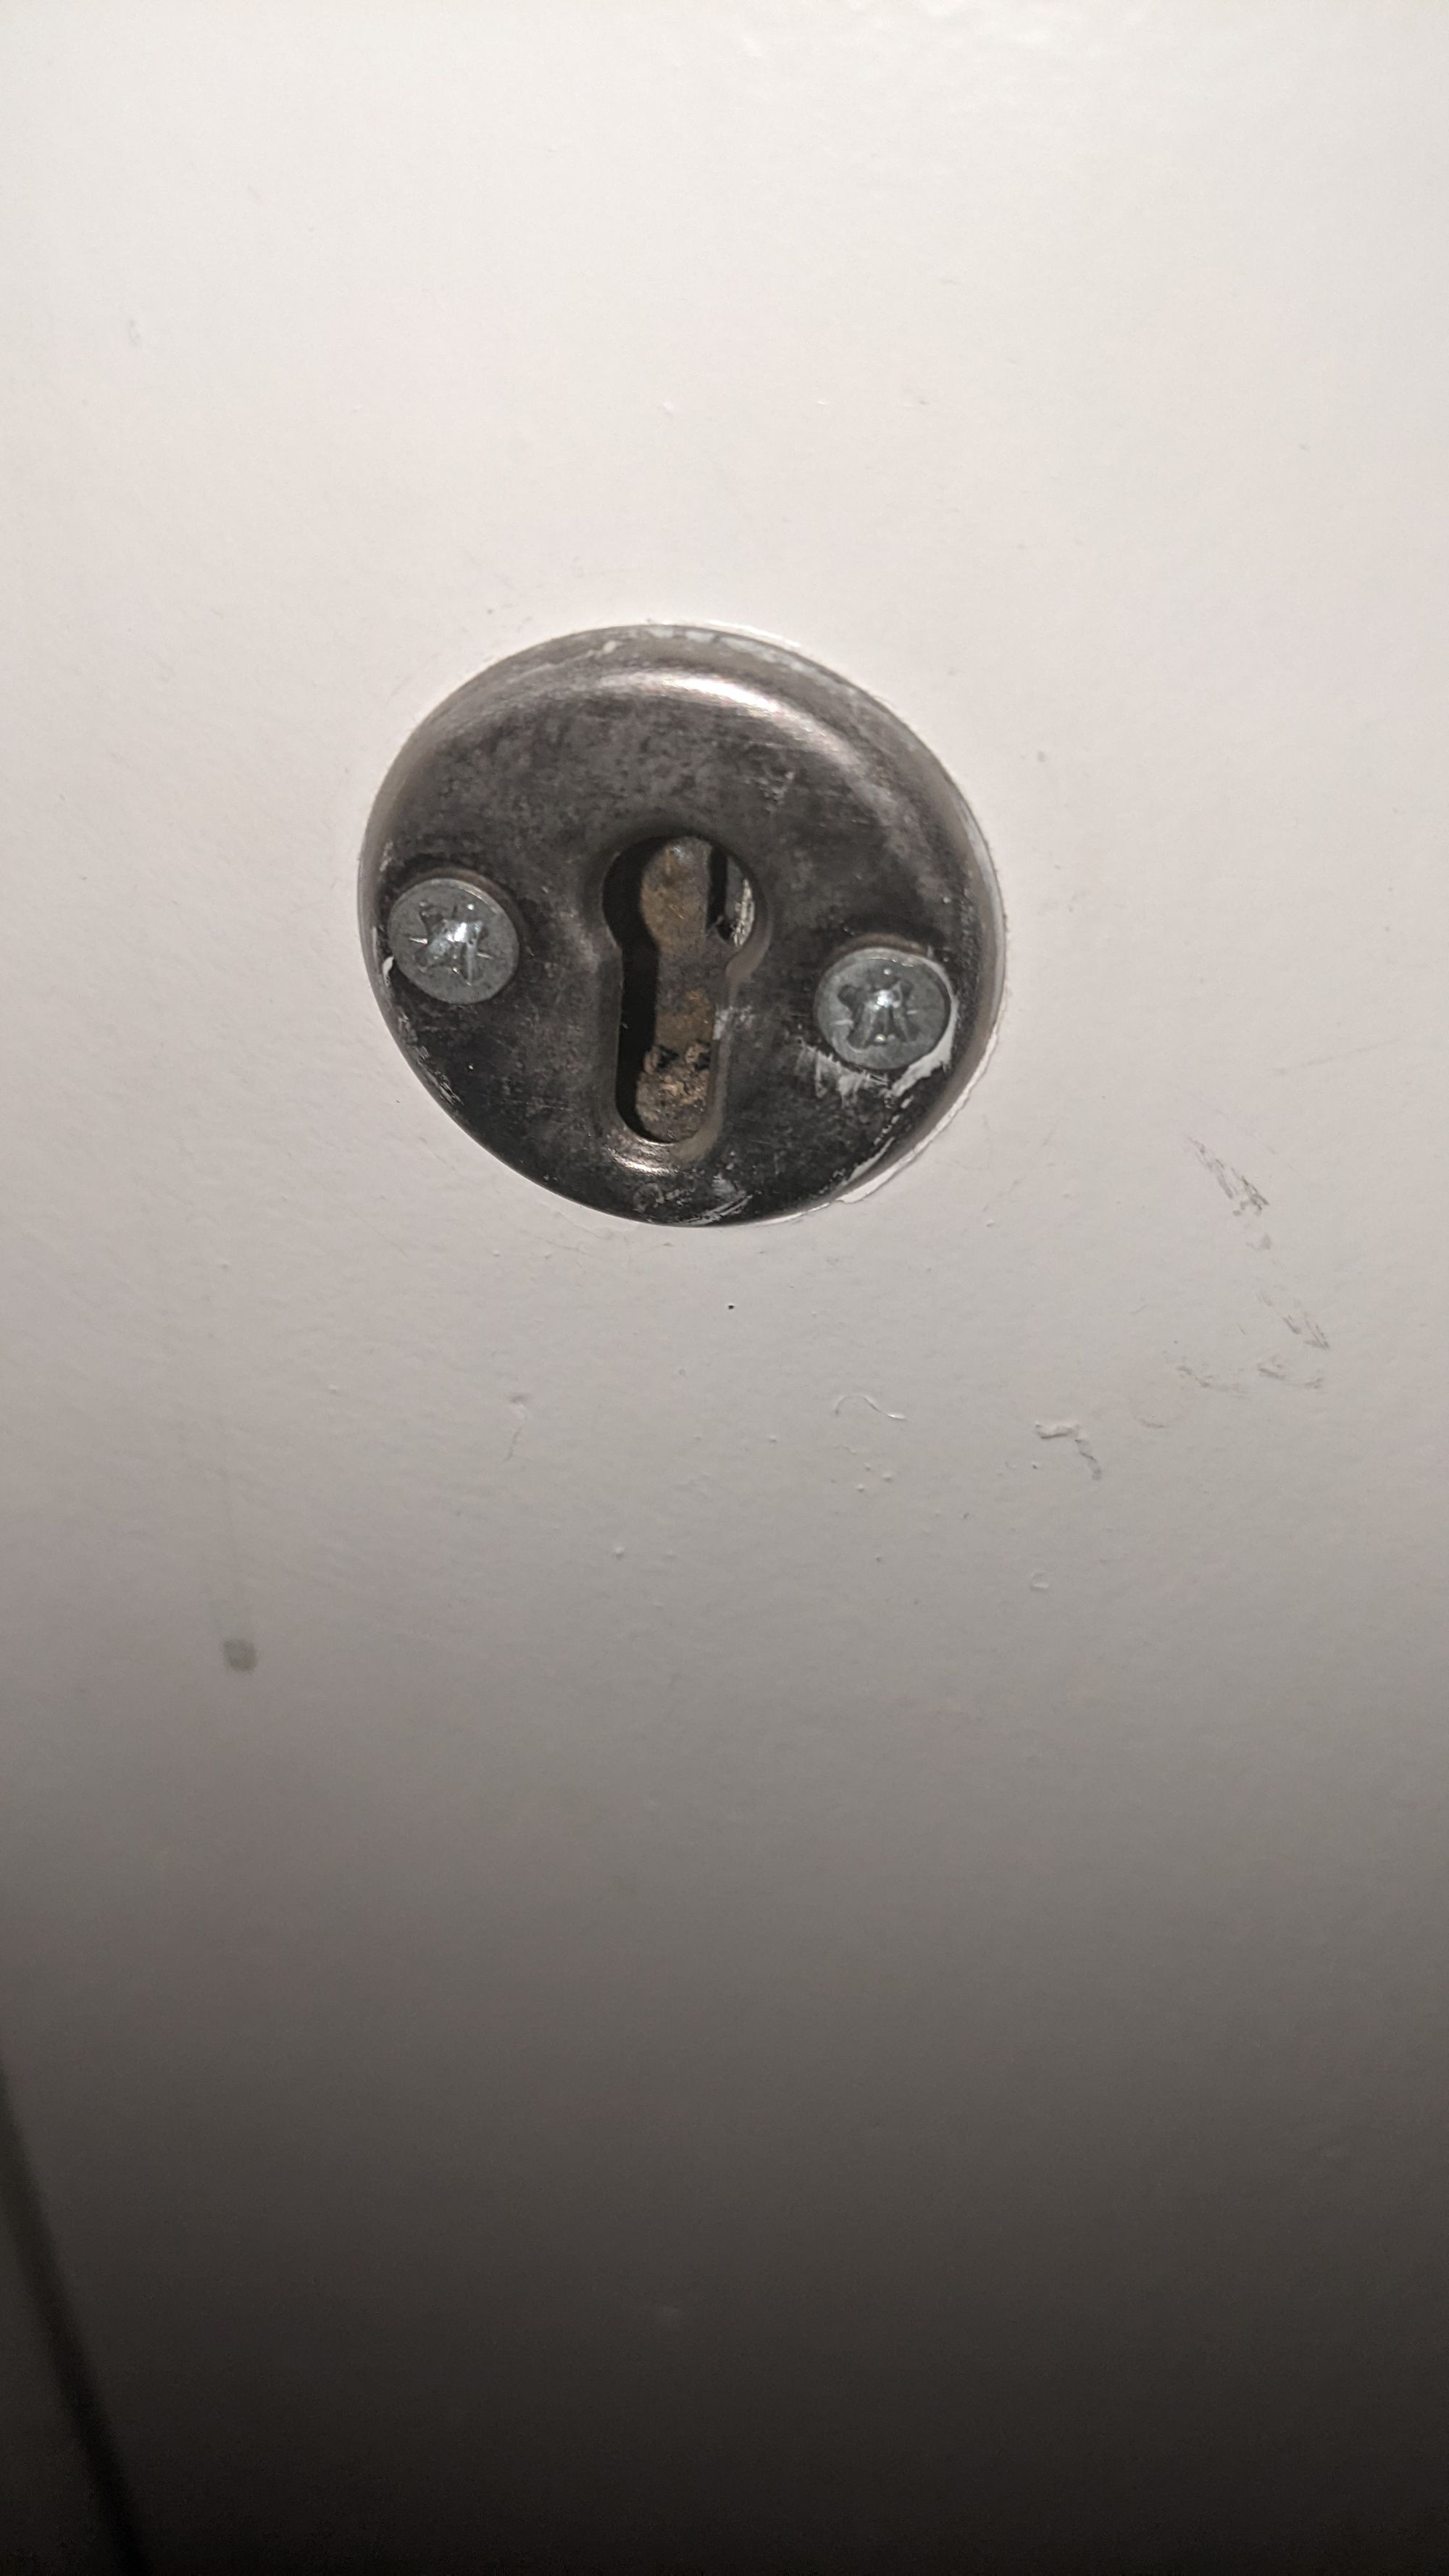 Picture of a keyhole